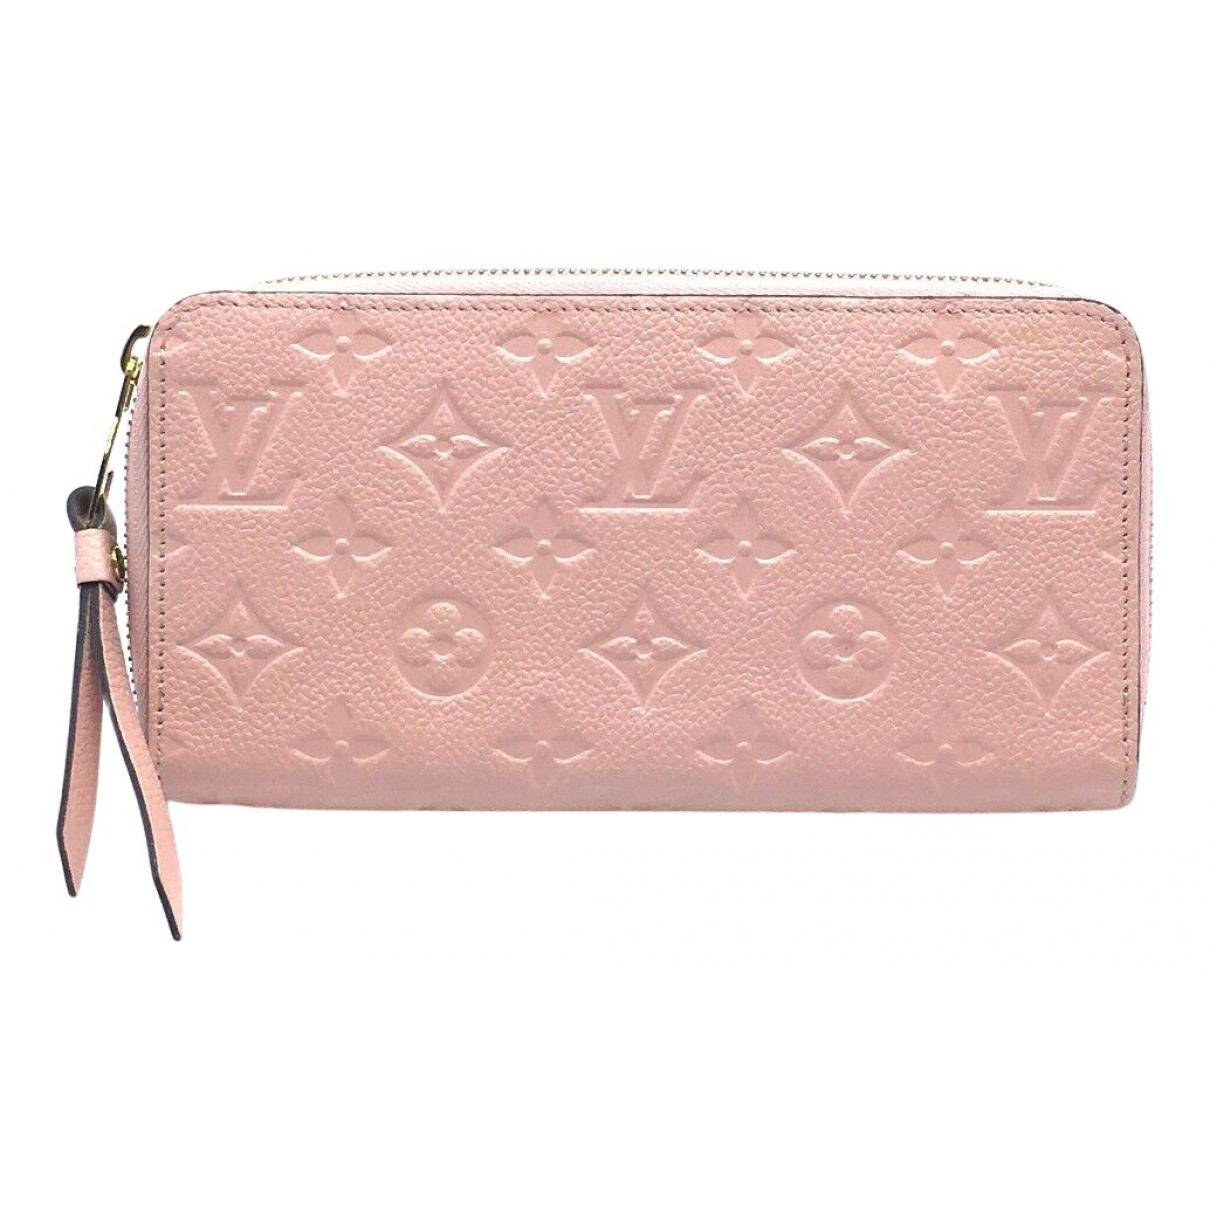 louis wallet womens leather